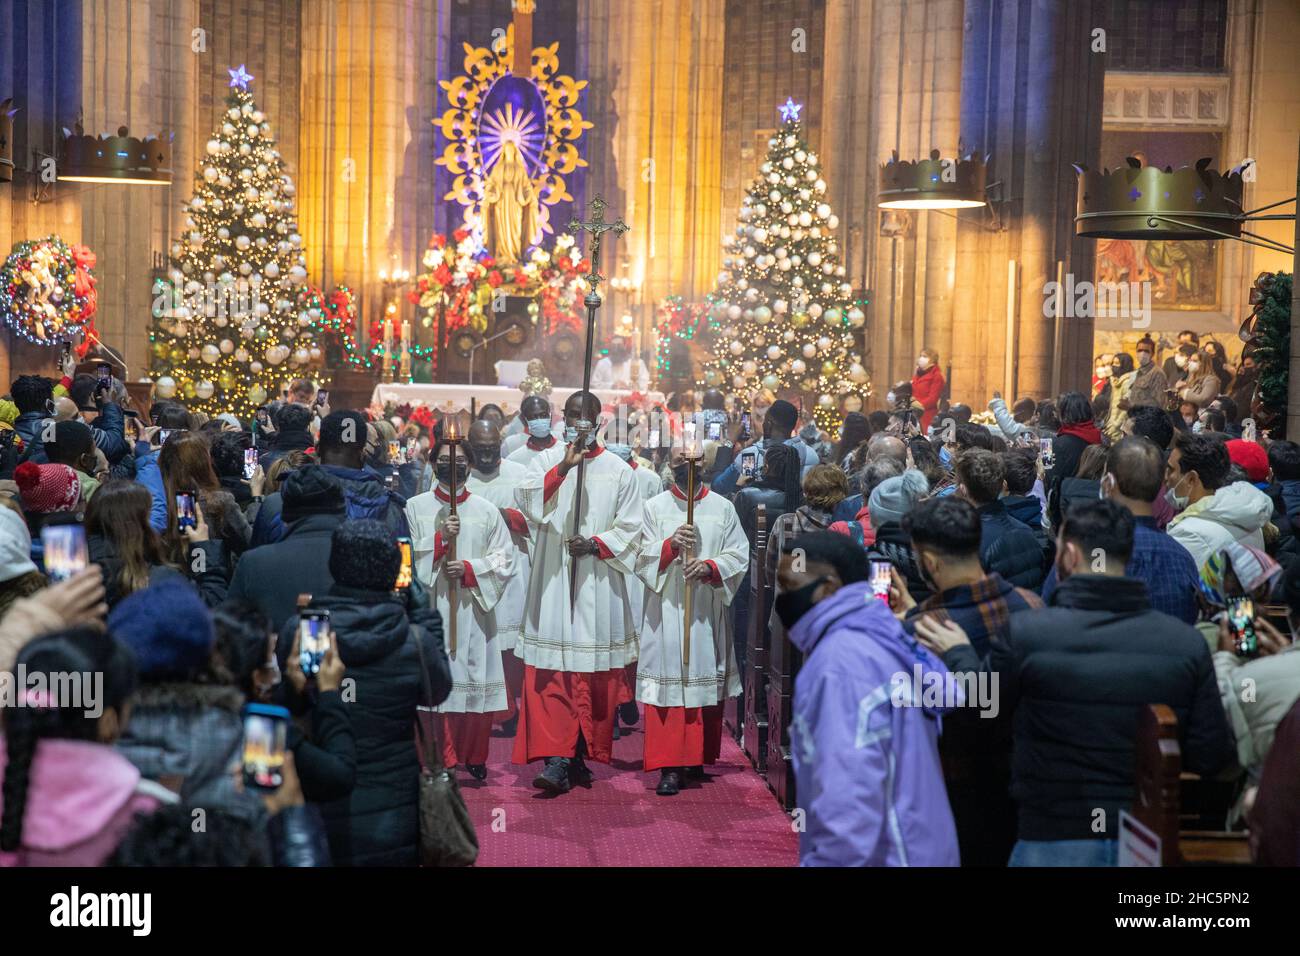 Celebration of the Christmas liturgy at the St. Anthony of Padua Church during the pandemic days in Istanbul, Turkey, December 24, 2021. Stock Photo